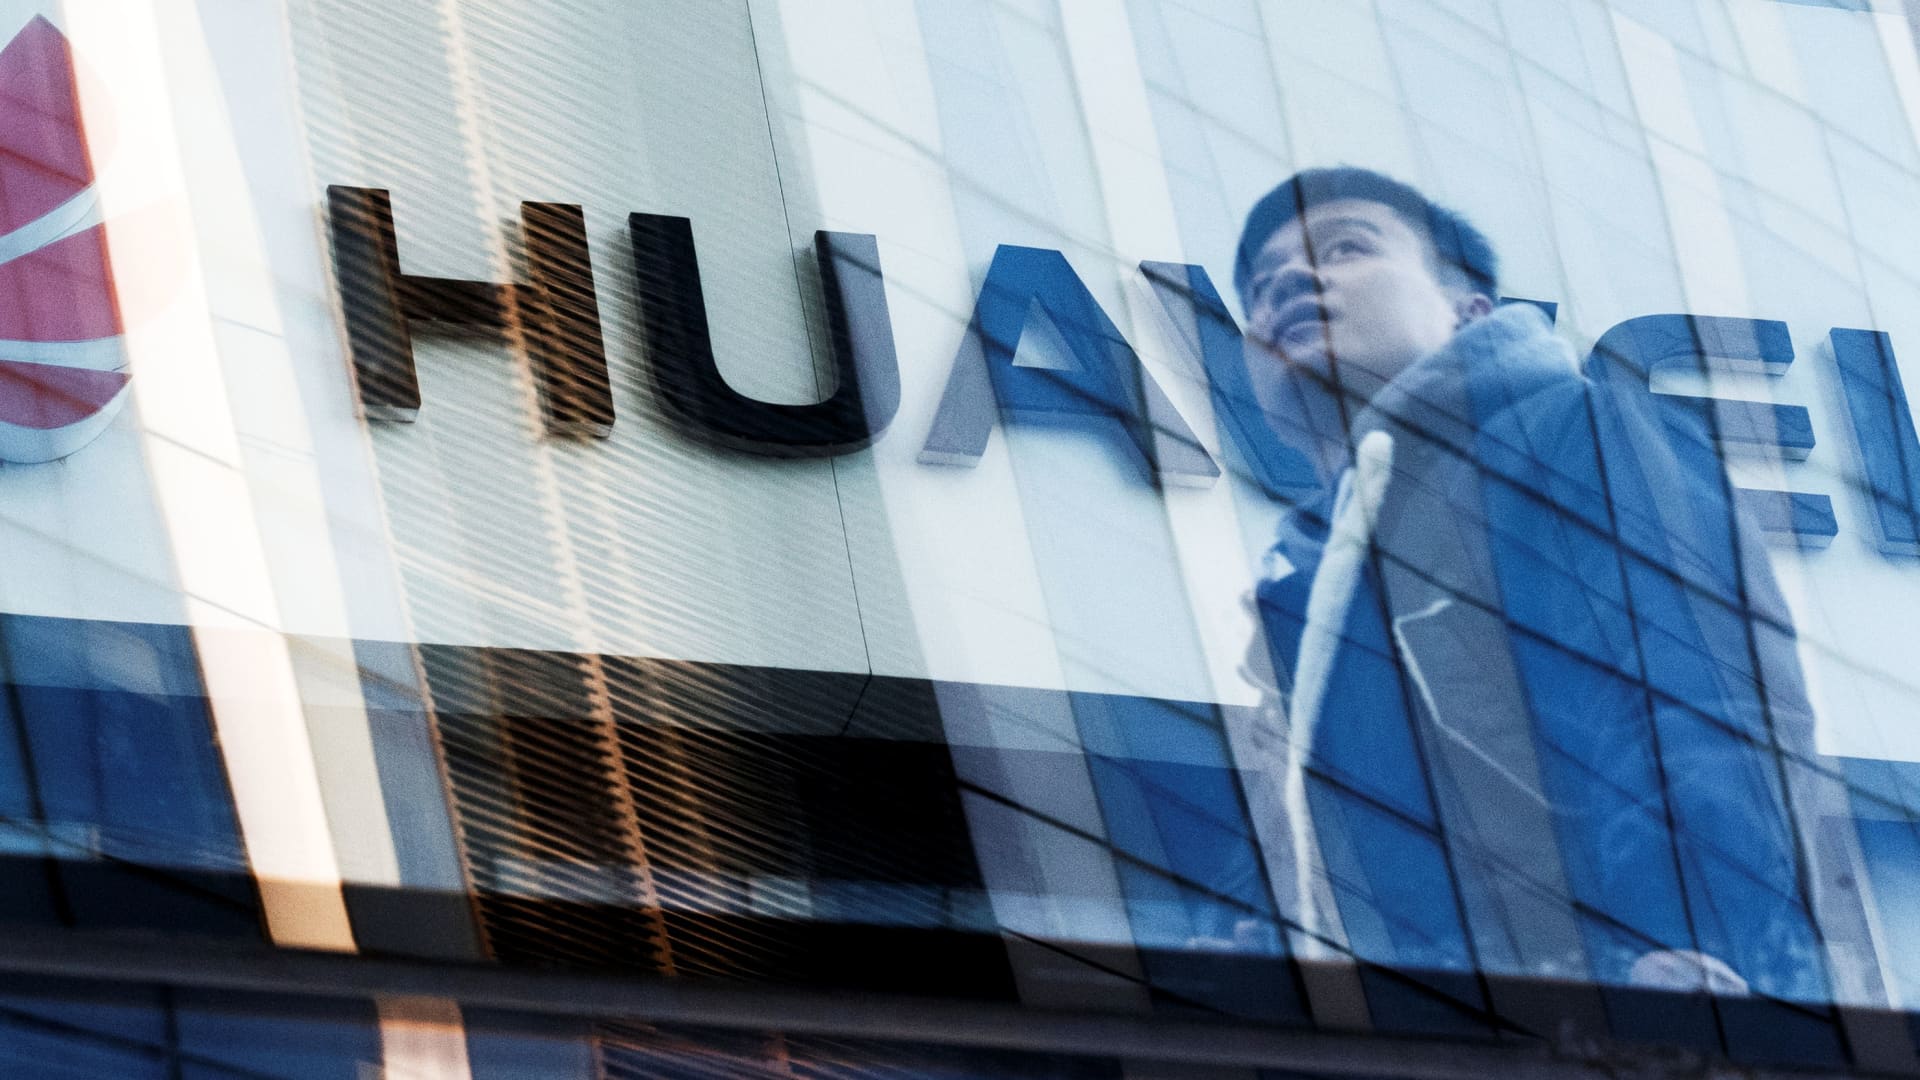 Chinese social media users are rallying behind Huawei. Some say they're switching from Apple